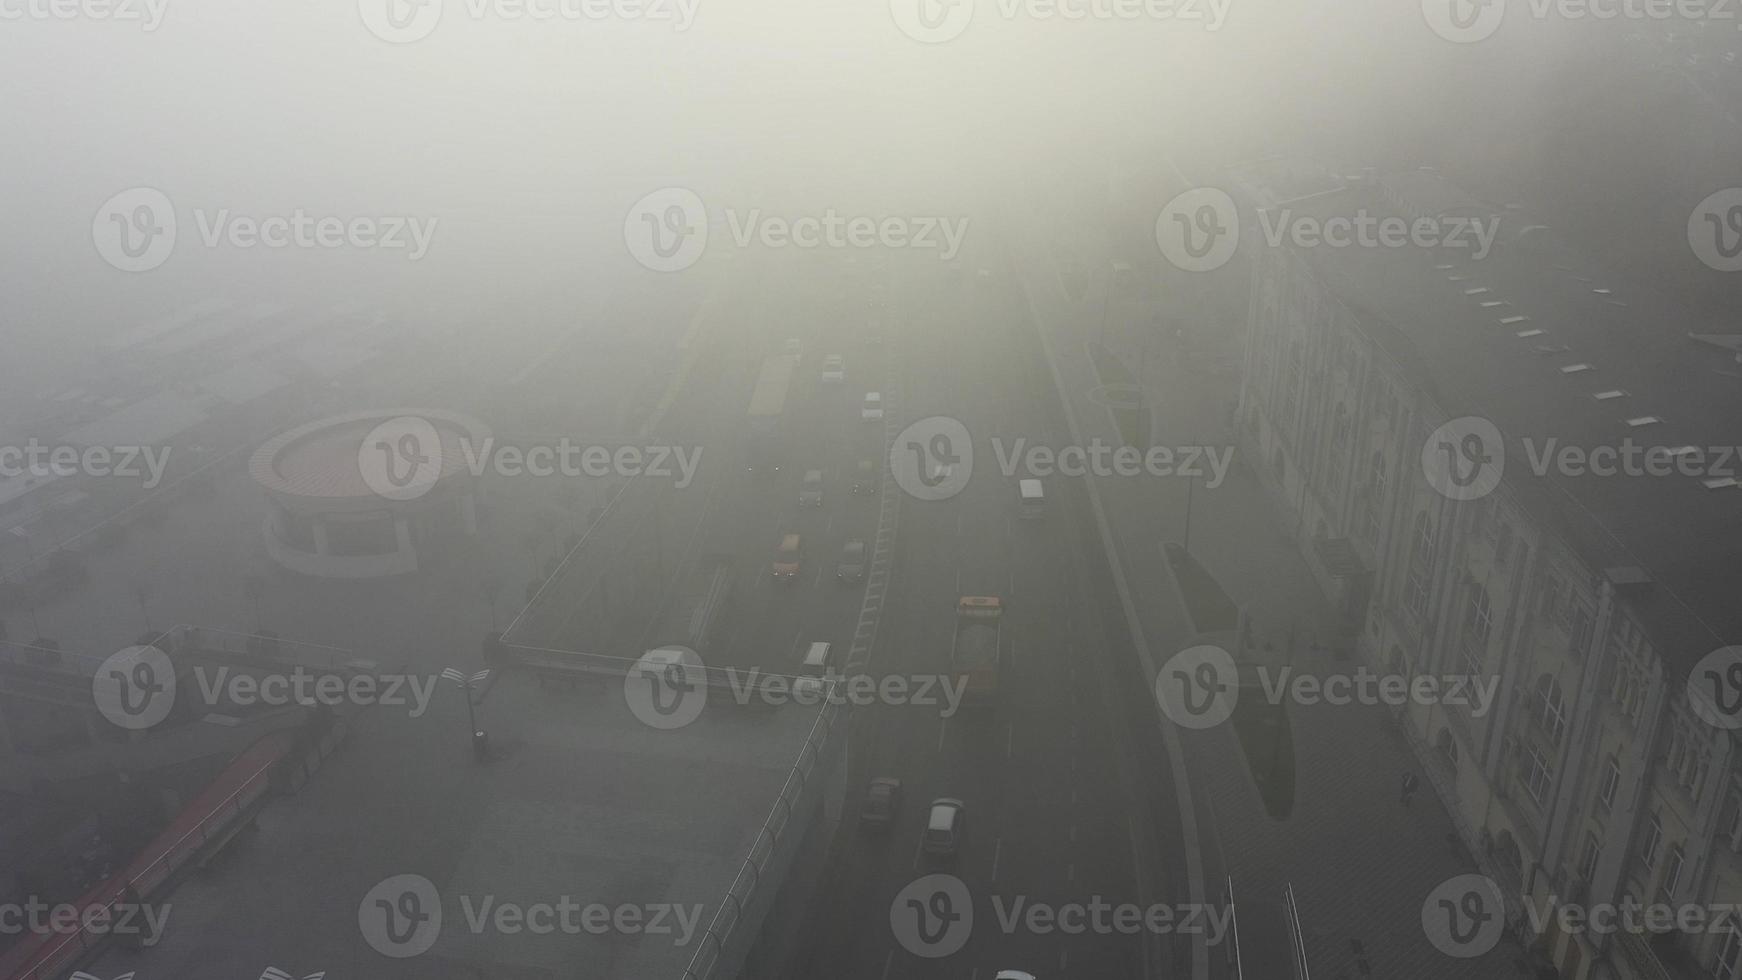 A city covered in fog. City traffic, aerial view photo